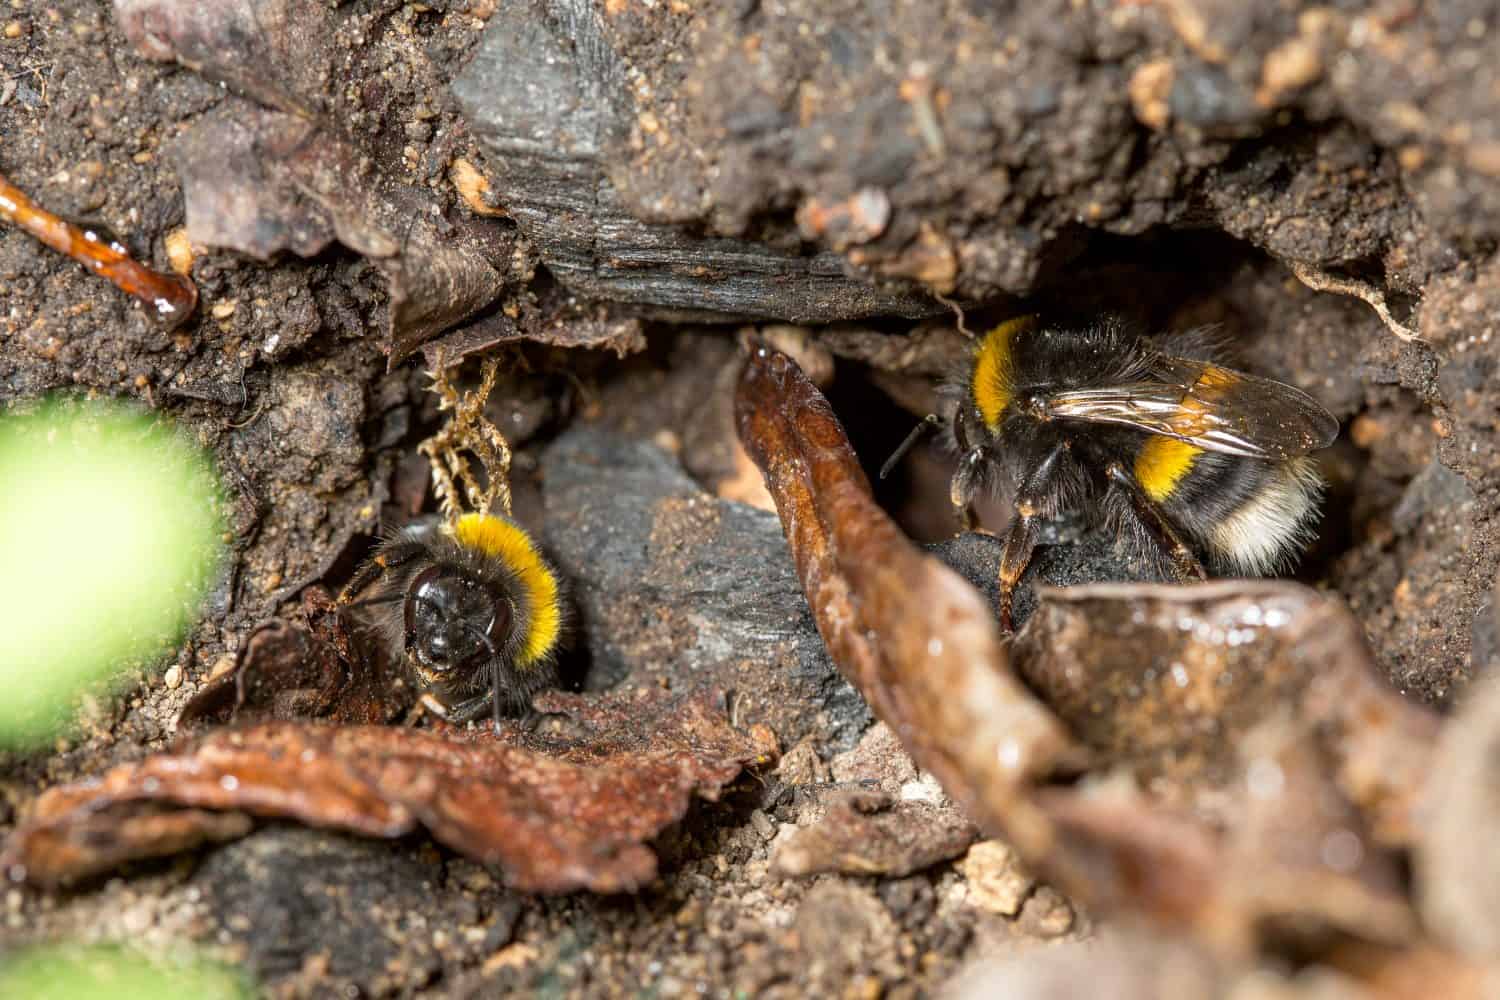 Photograph of the opening of a bumblebee (Bombus sp.) nest. Two bumble bees are visible amongst the mud and dead leaves. Photographed in Rotorua, New Zealand.